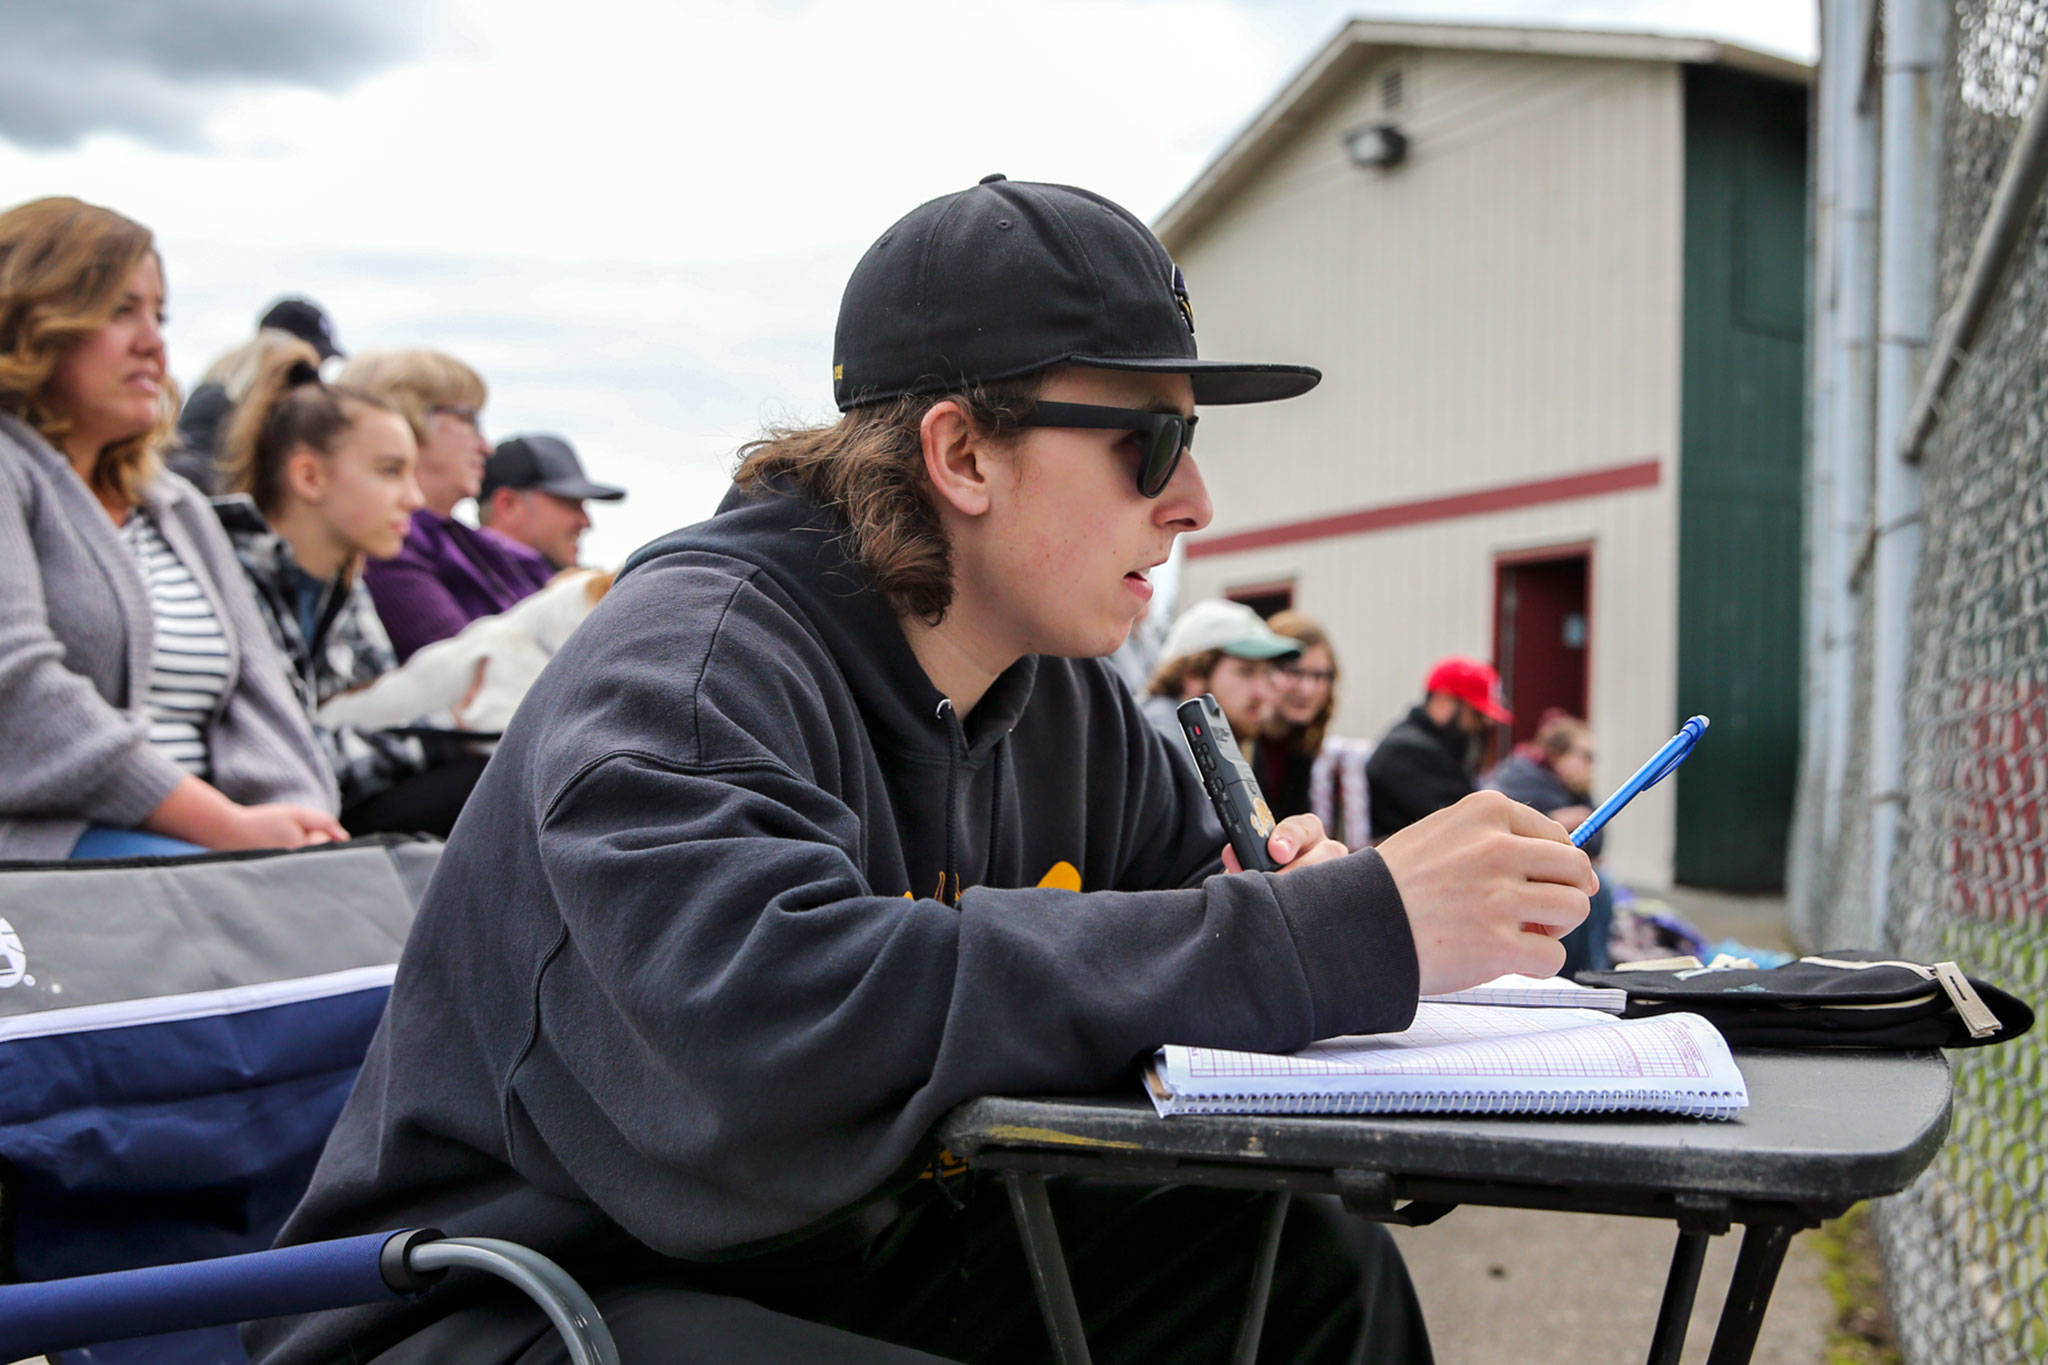 Lake Stevens senior Payne Patchett records play-by-play audio during a Vikings baseball game last month. The talented 18-year-old broadcaster recently landed a minor-league baseball radio job as the play-by-play voice of the Salem-Keizer Volcanoes. (Kevin Clark / The Herald)